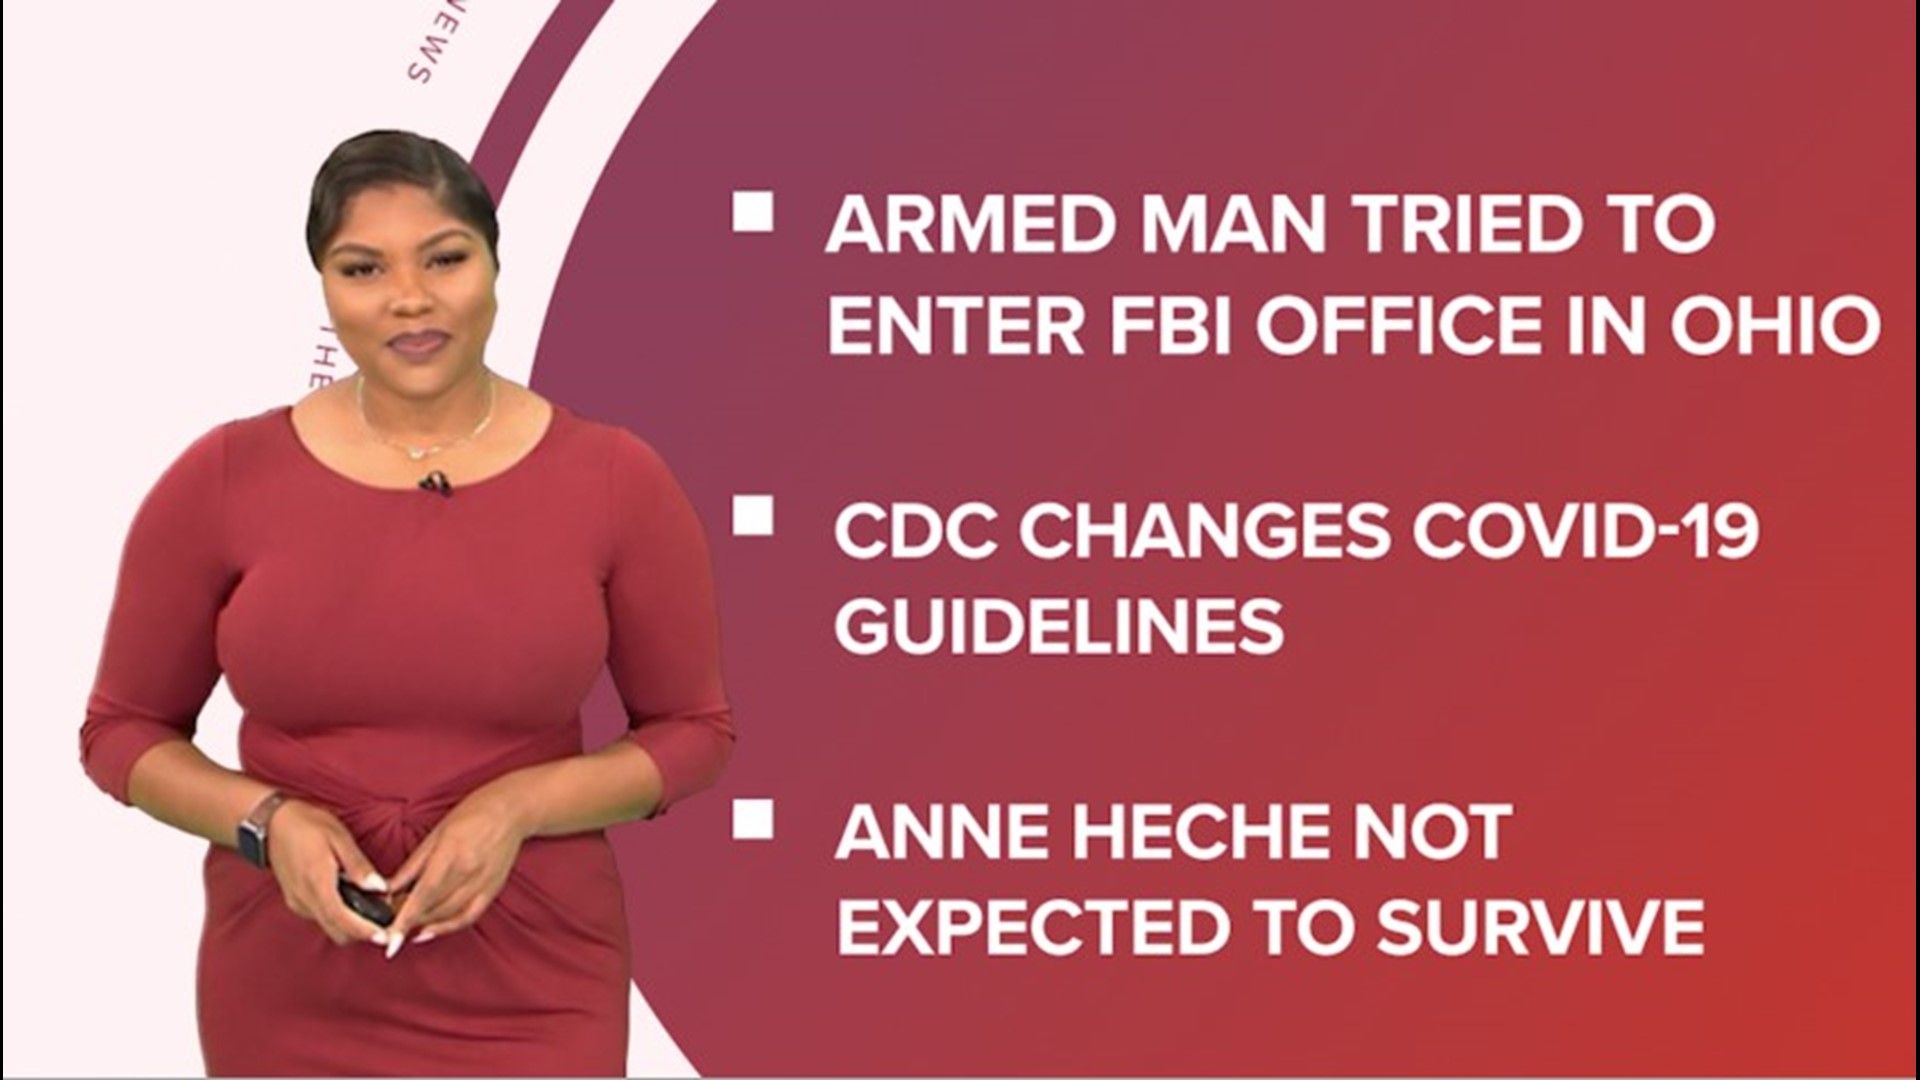 A look at what is happening in the news from the CDC changing COVID-19 guidelines to an armed man trying to go into the FBI's Cincinnati office.